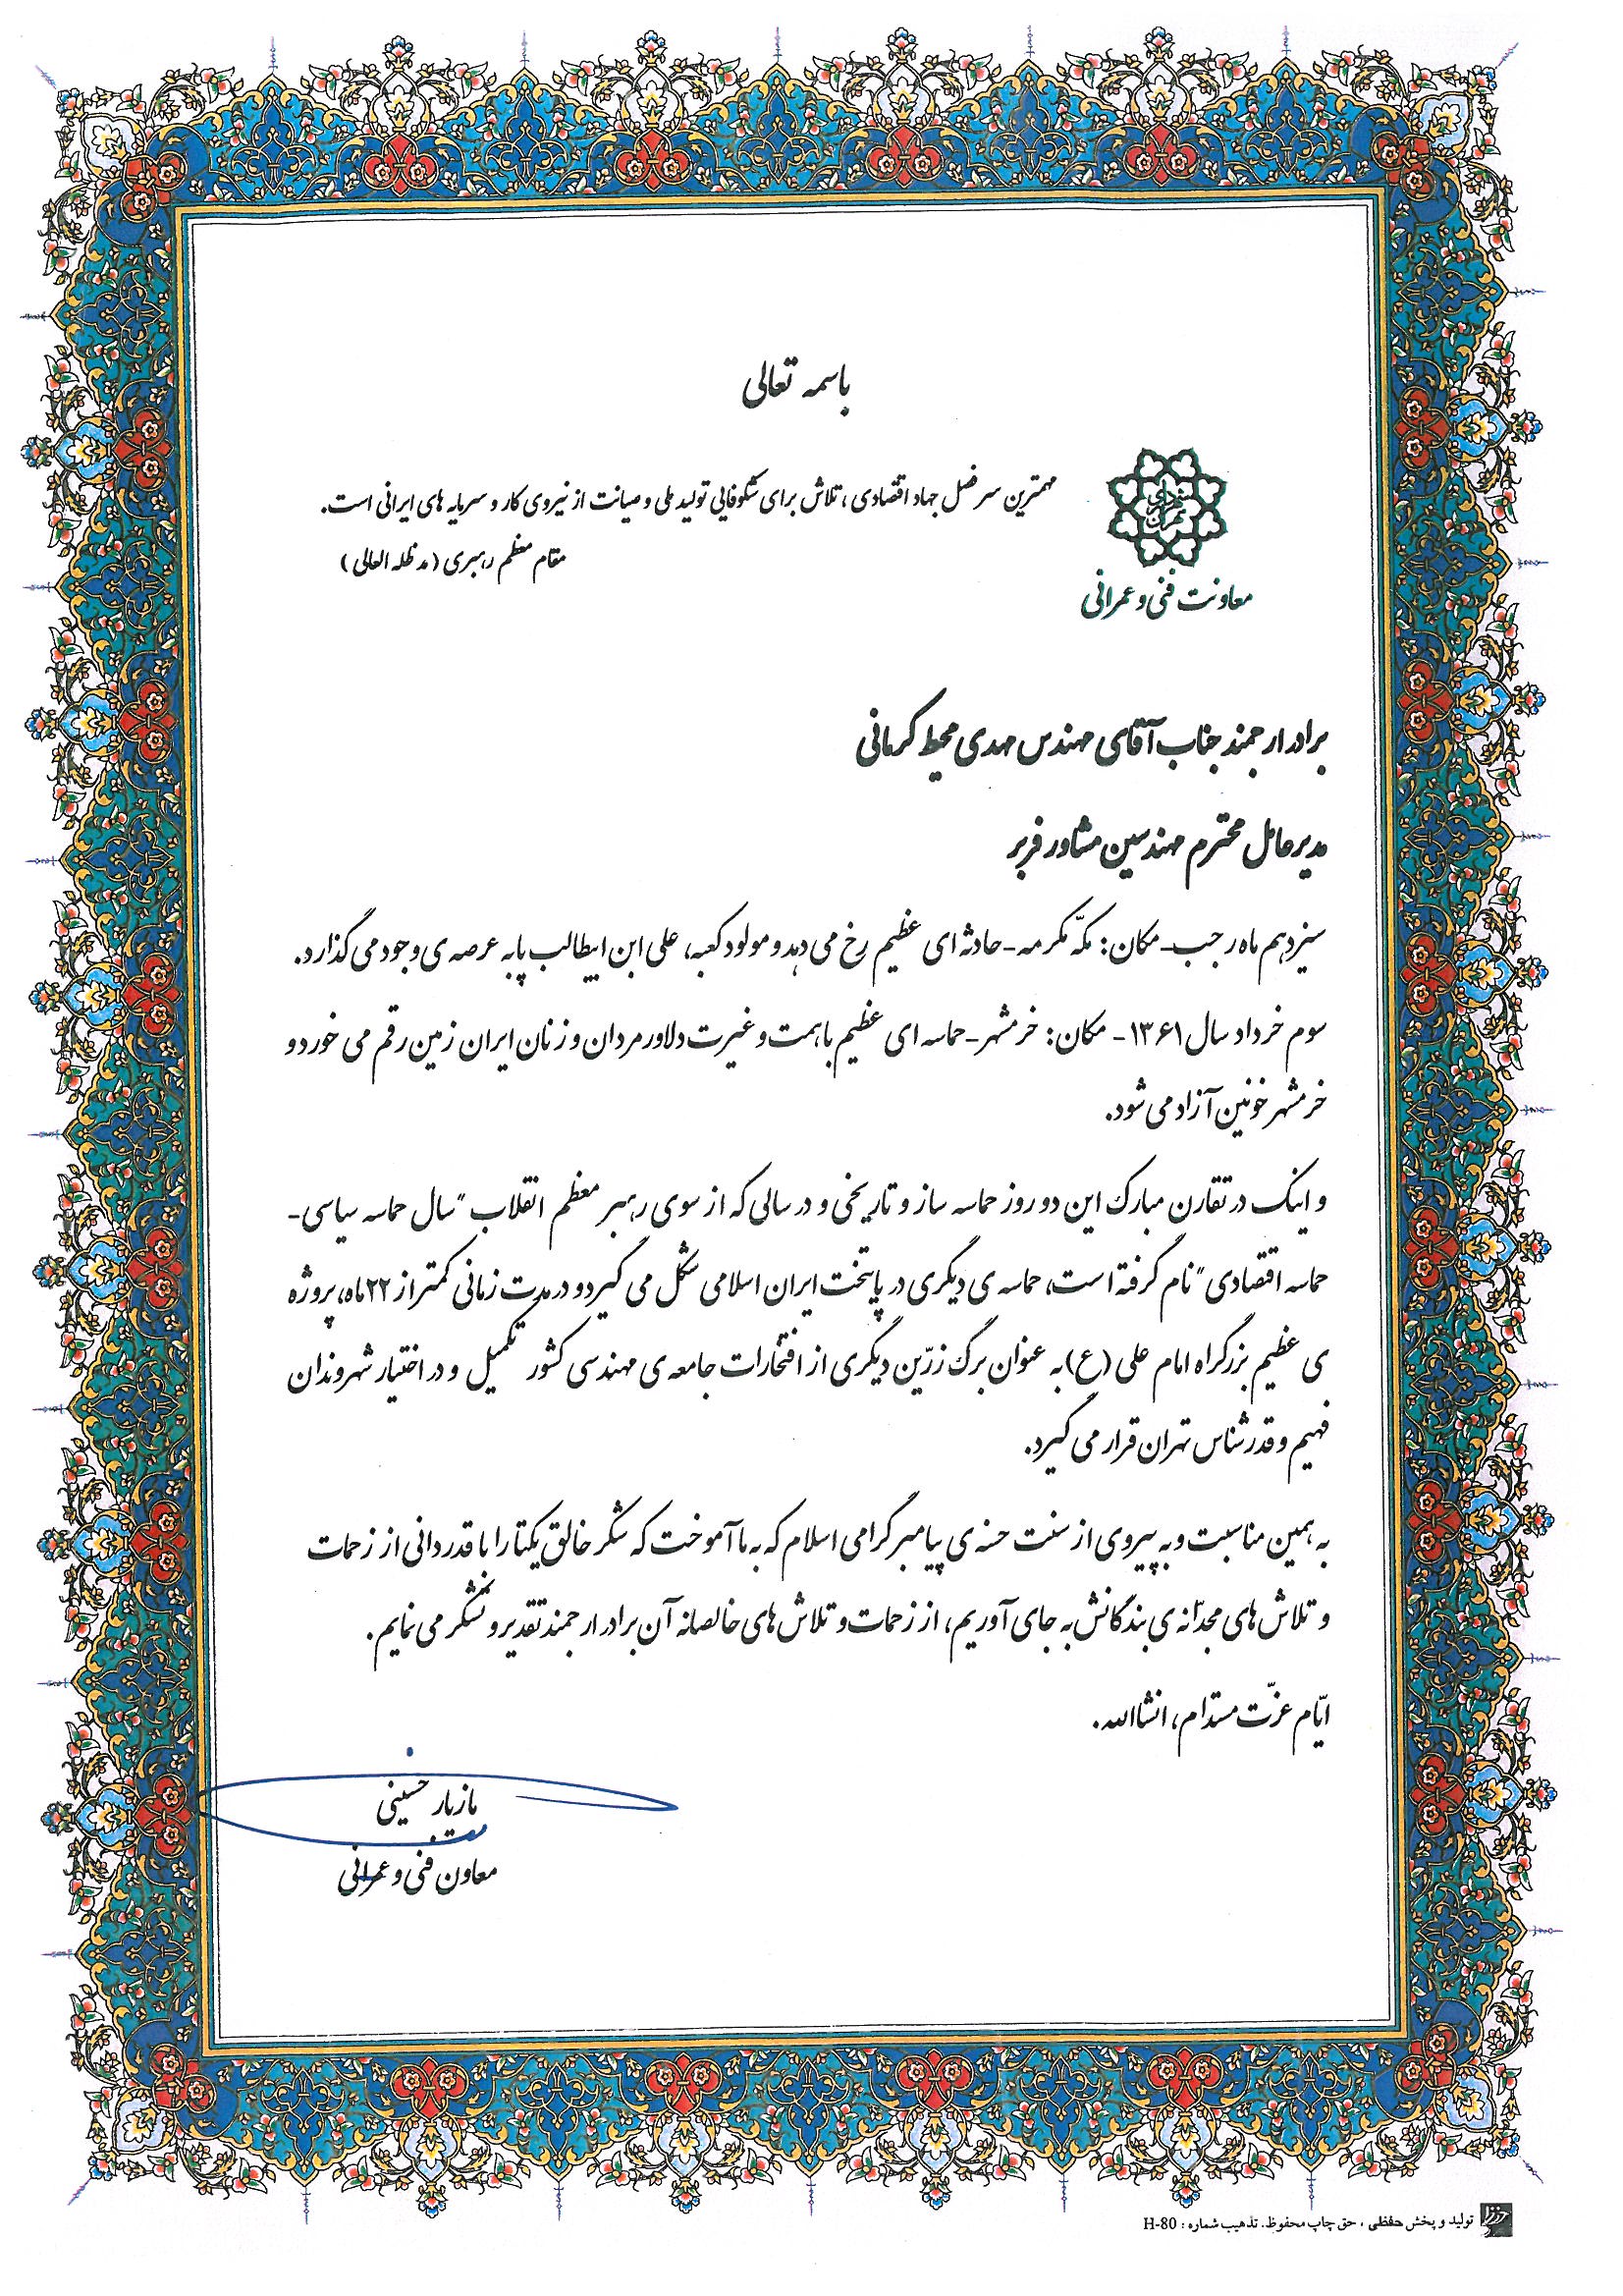 Project of High Supervision and Supervision of the Executive Operations of the Shrine to the Shrine - Certificate of Appreciation of the Deputy of Technical and Development of Tehran for Imam Ali highway as a golden leaf and another of the honors of the Iranian Society of Engineers